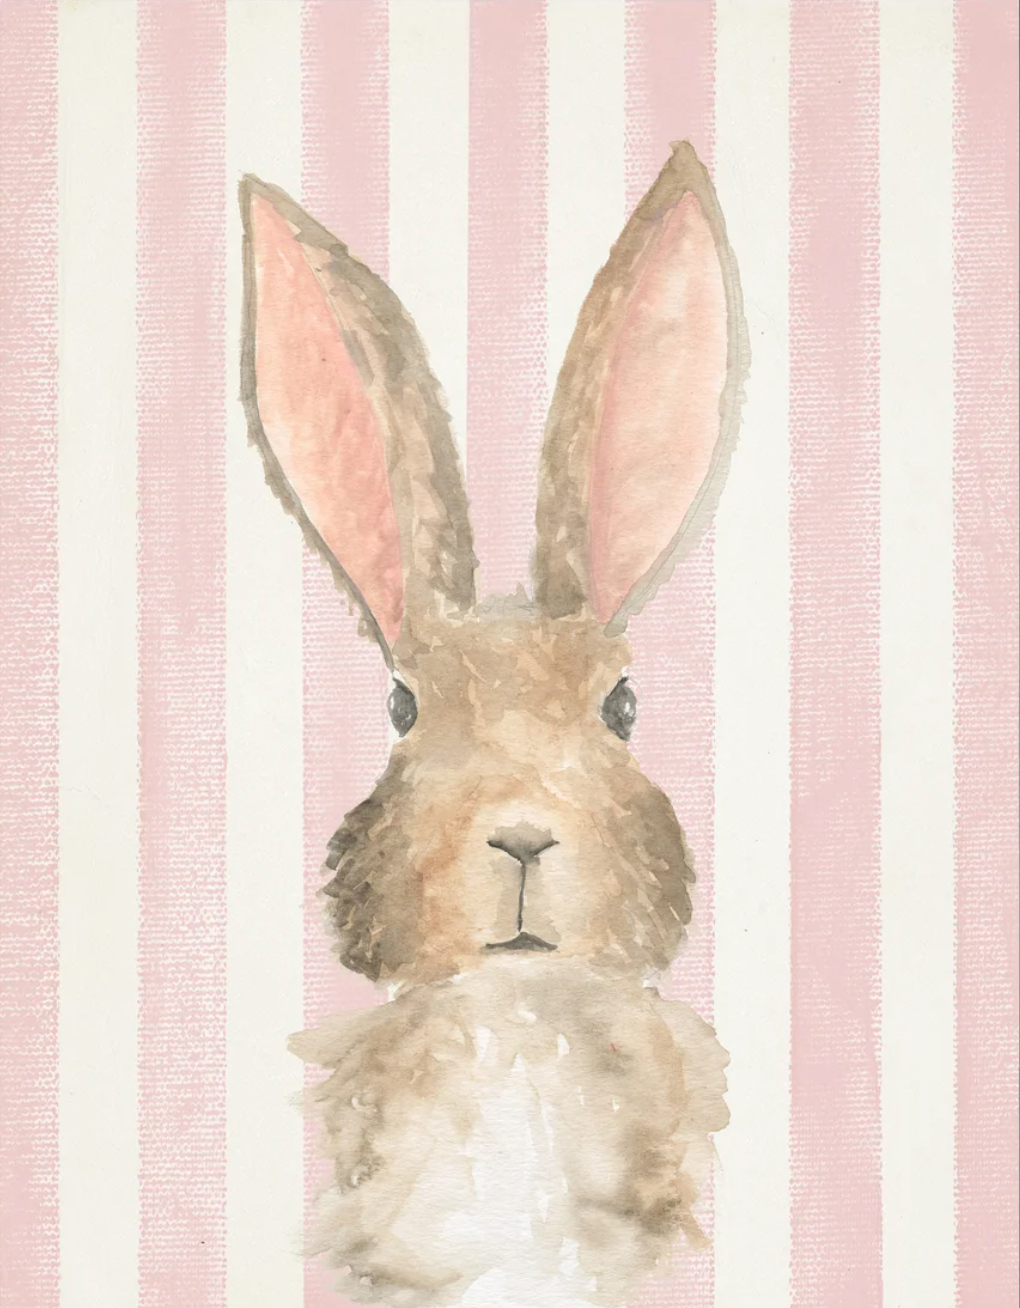 Framed Art, Watercolor Baby Bunny on Pink Stripe